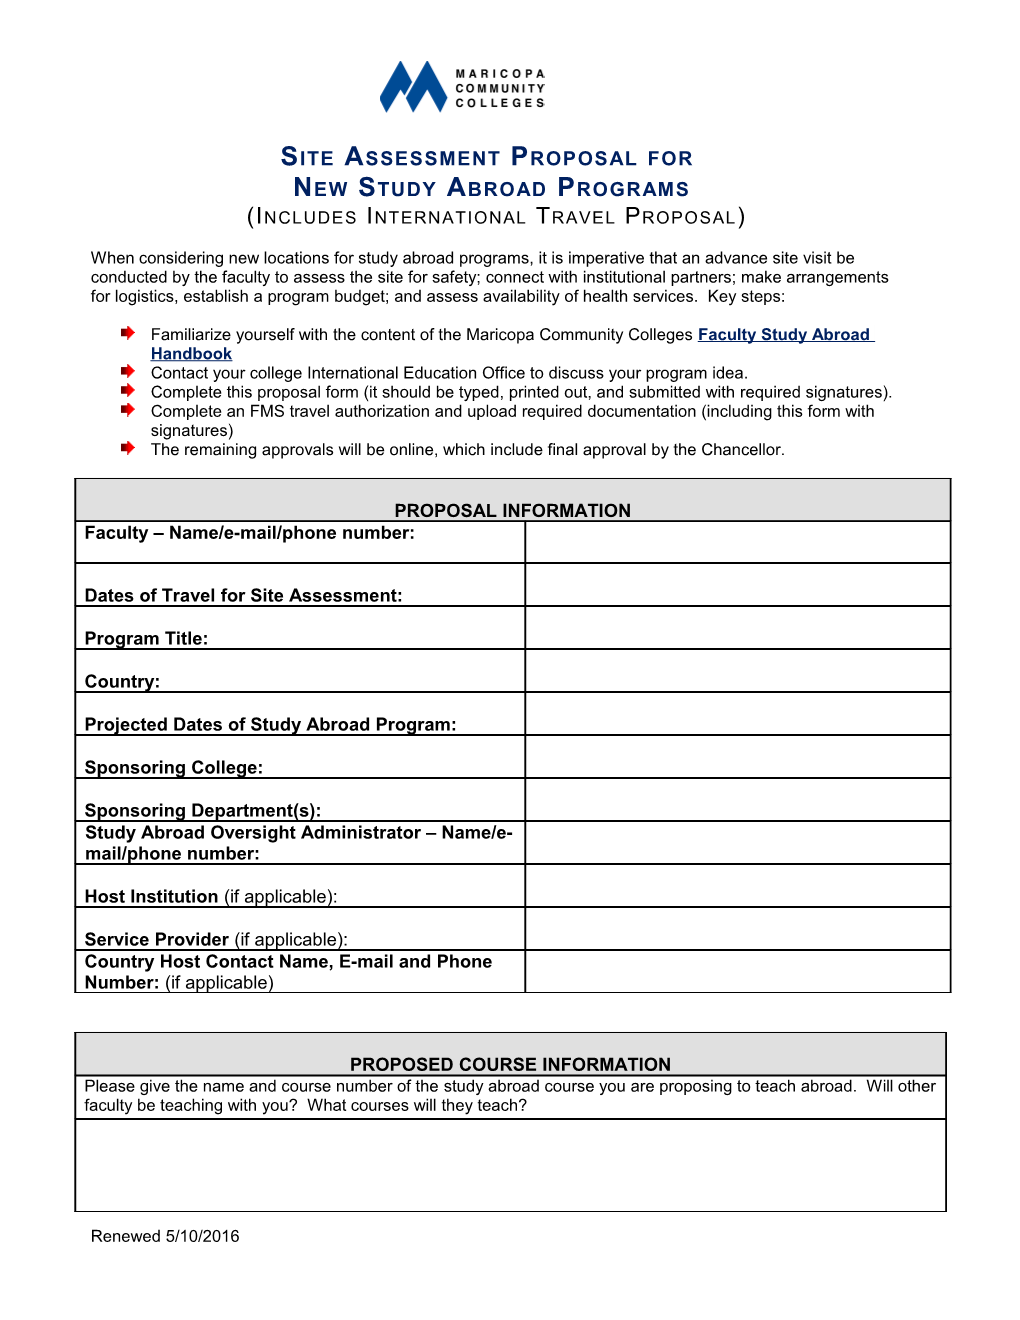 Form 1 Instructions: Study Abroad Requirements & Proposal Form